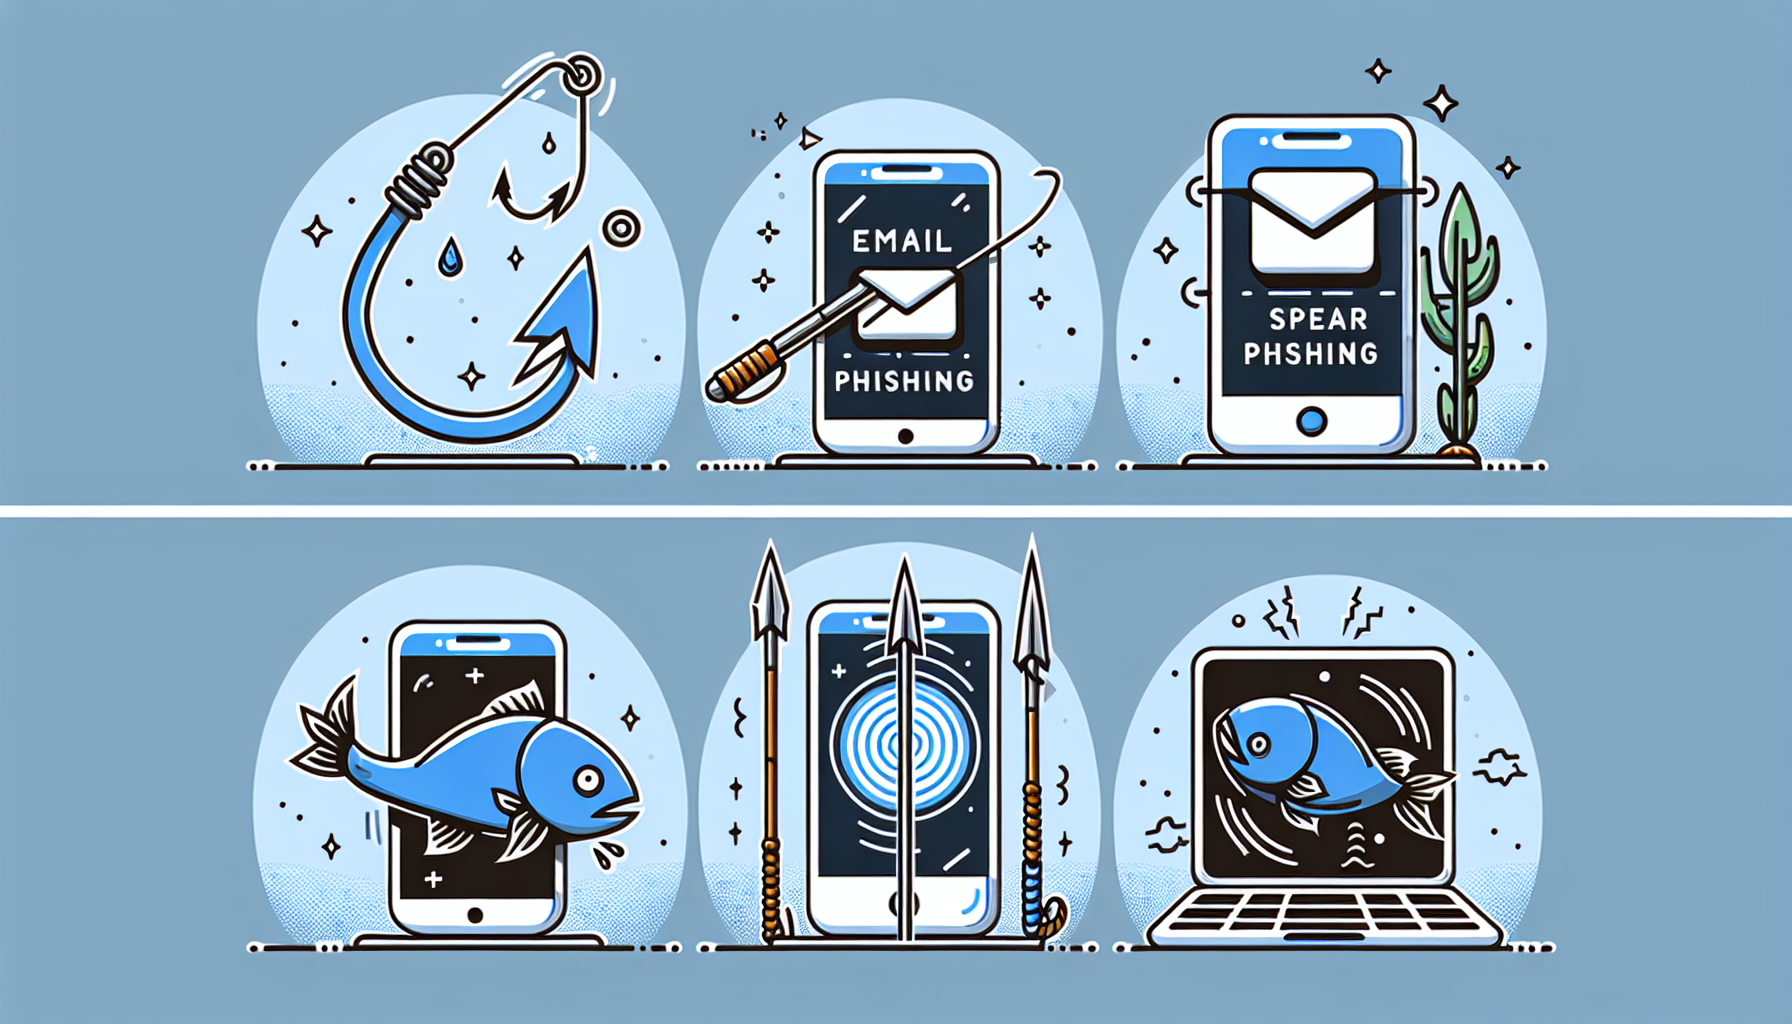 Illustration of different types of phishing techniques